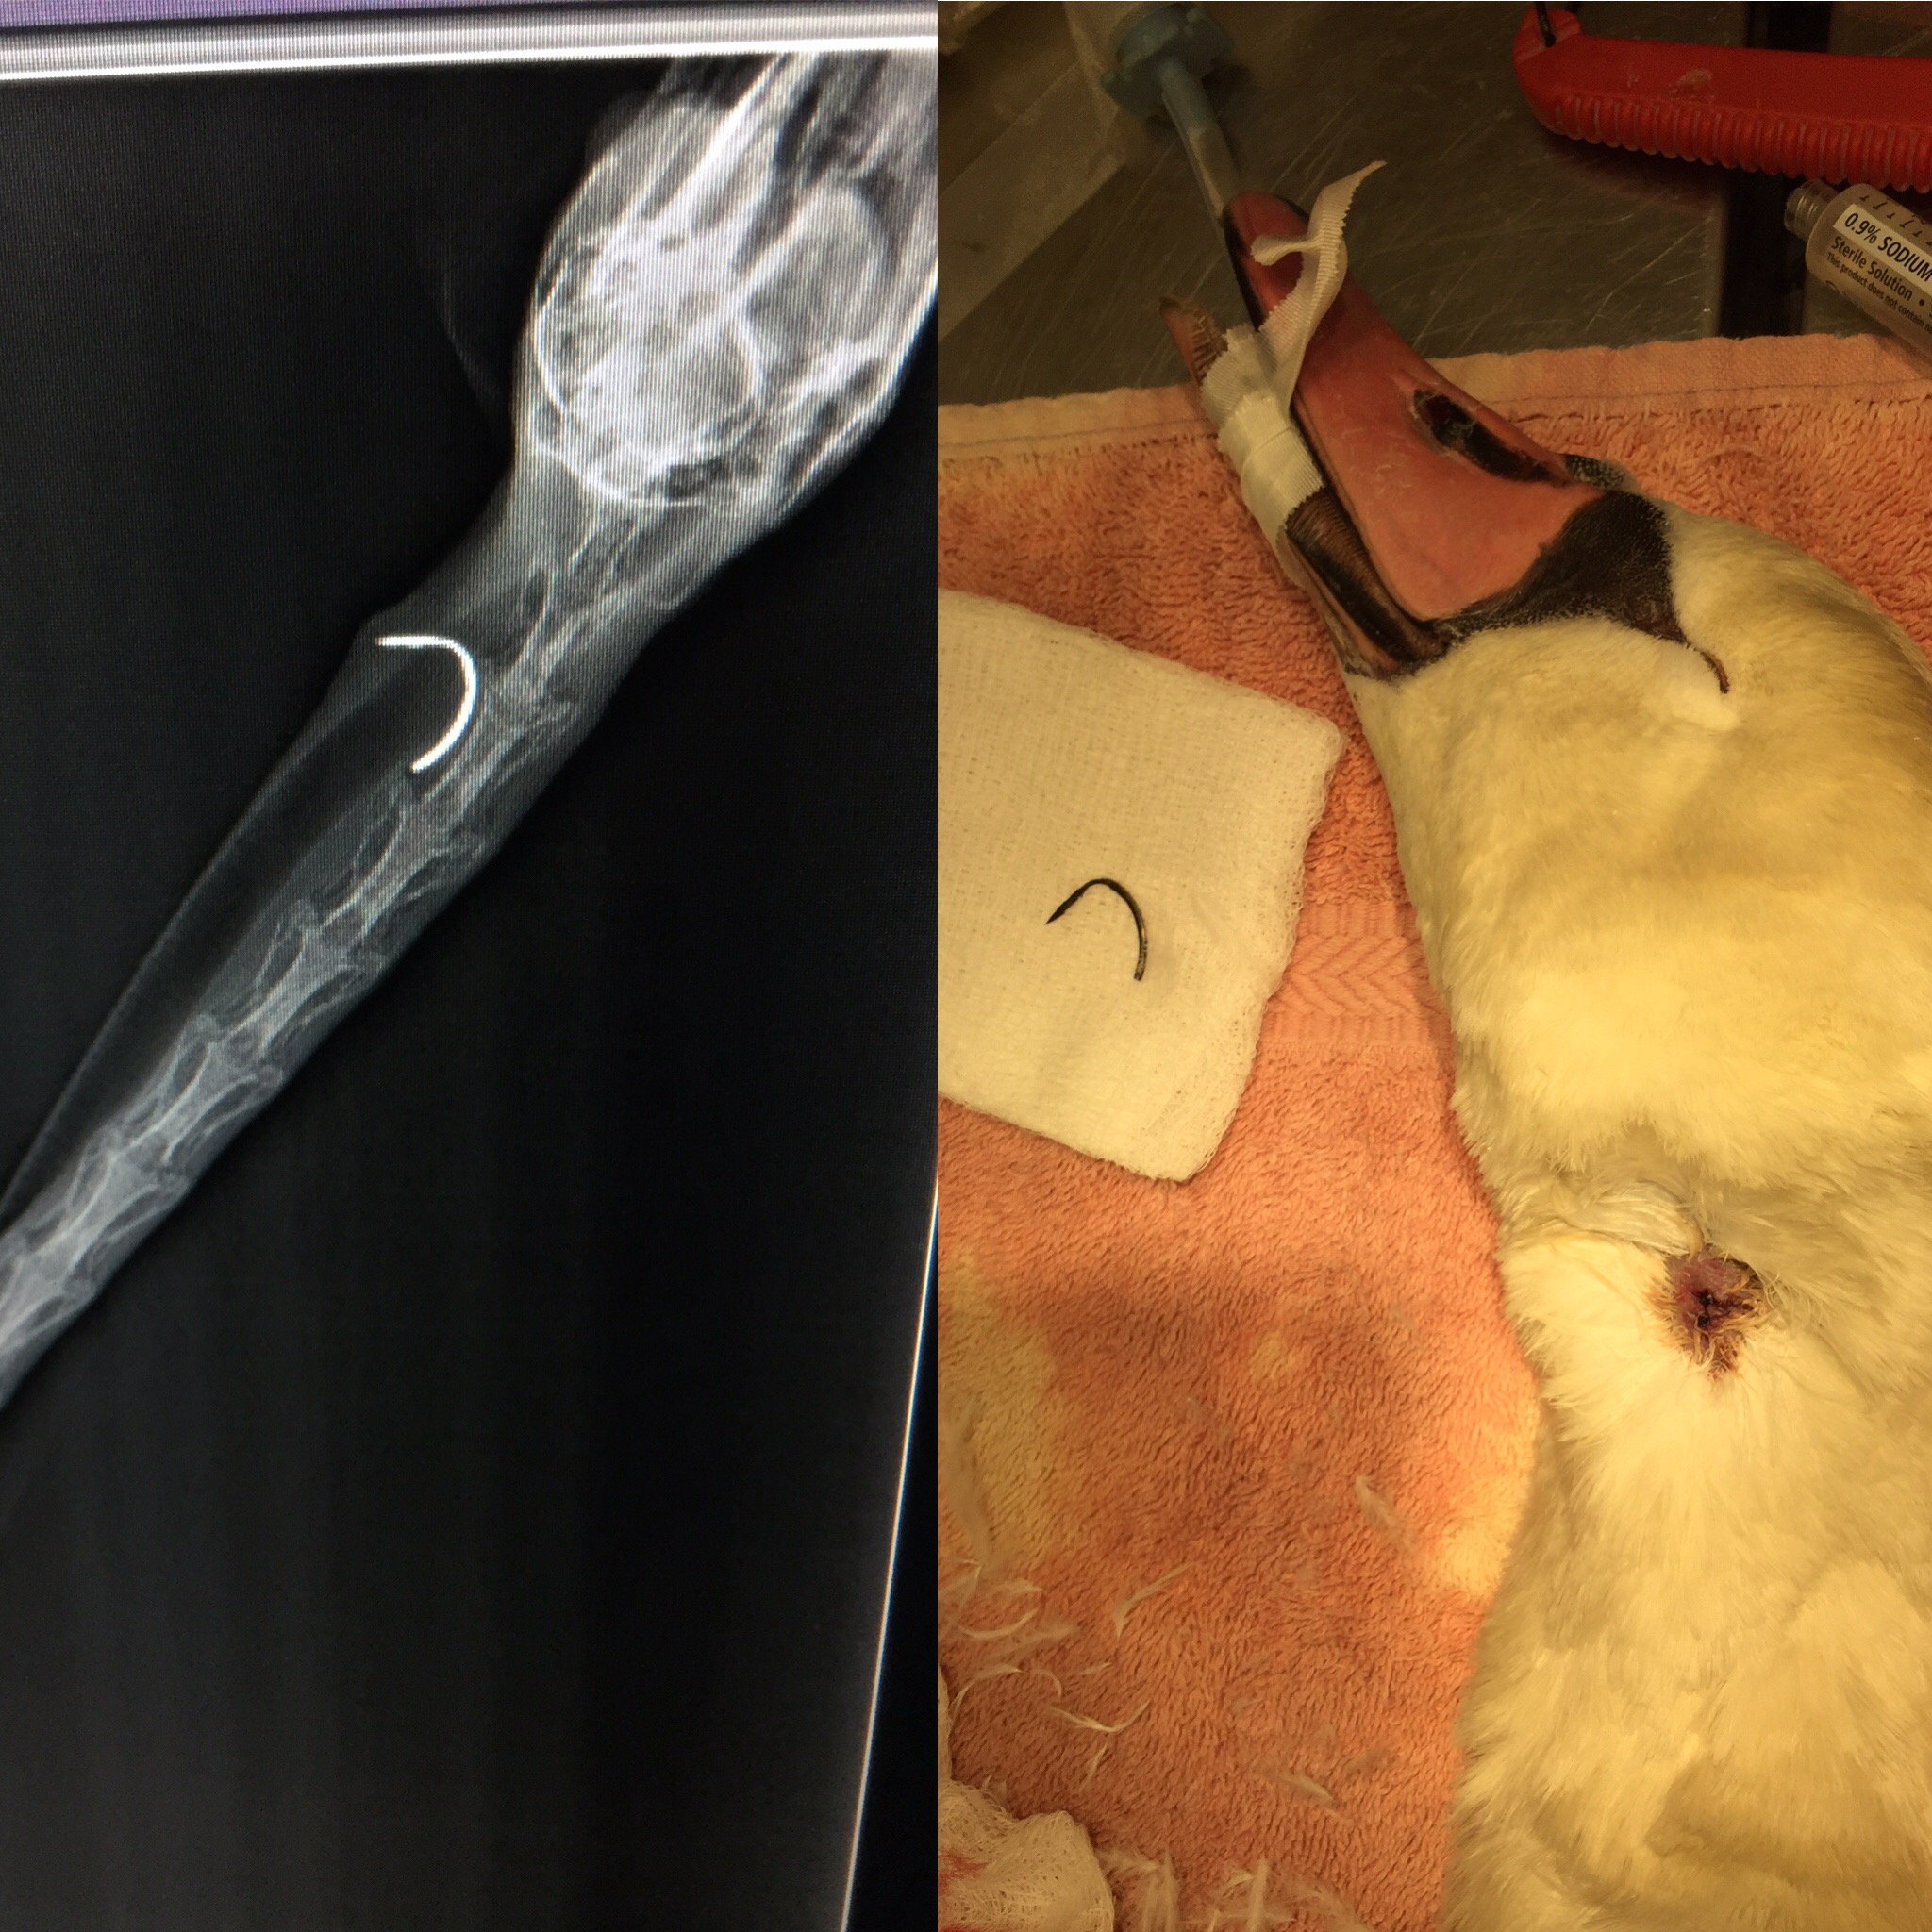 Swan has Hook Removed from Neck During Surgery